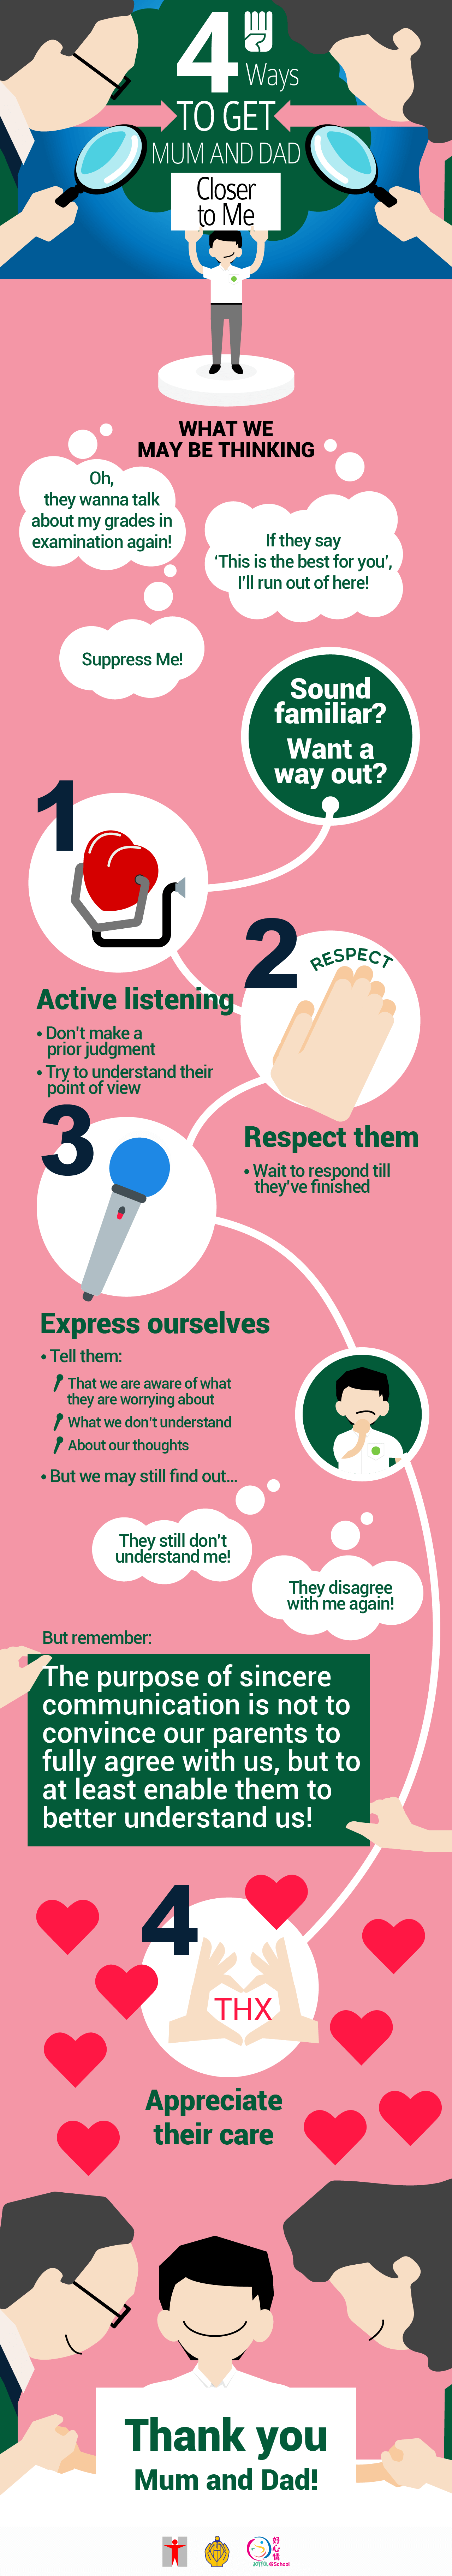 (Info graphic) 4 Ways to Get Mum and Dad Closer to Me/WHAT WE MAY BE THINKING/Oh, they wanna talk about my grades in examination again!/If they say ‘This is the best for you’, I’ll run out of here!Suppress Me!Sound familiar? Want a way out?/Active listening/Don’t make a prior judgment/Try to understand their point of view/Respect them/Wait to respond till they’ve finished/Express ourselves/Tell them:That we are aware of what they are worrying about/What we don’t understand/About our thoughtsBut we may still find out…/They still don’t understand me!They disagree with me again!But remember:The purpose of sincere communication is not to convince our parents to fully agree with us, but to at least enable them to better understand us!/Appreciate their care/Thank you/Mum and Dad!